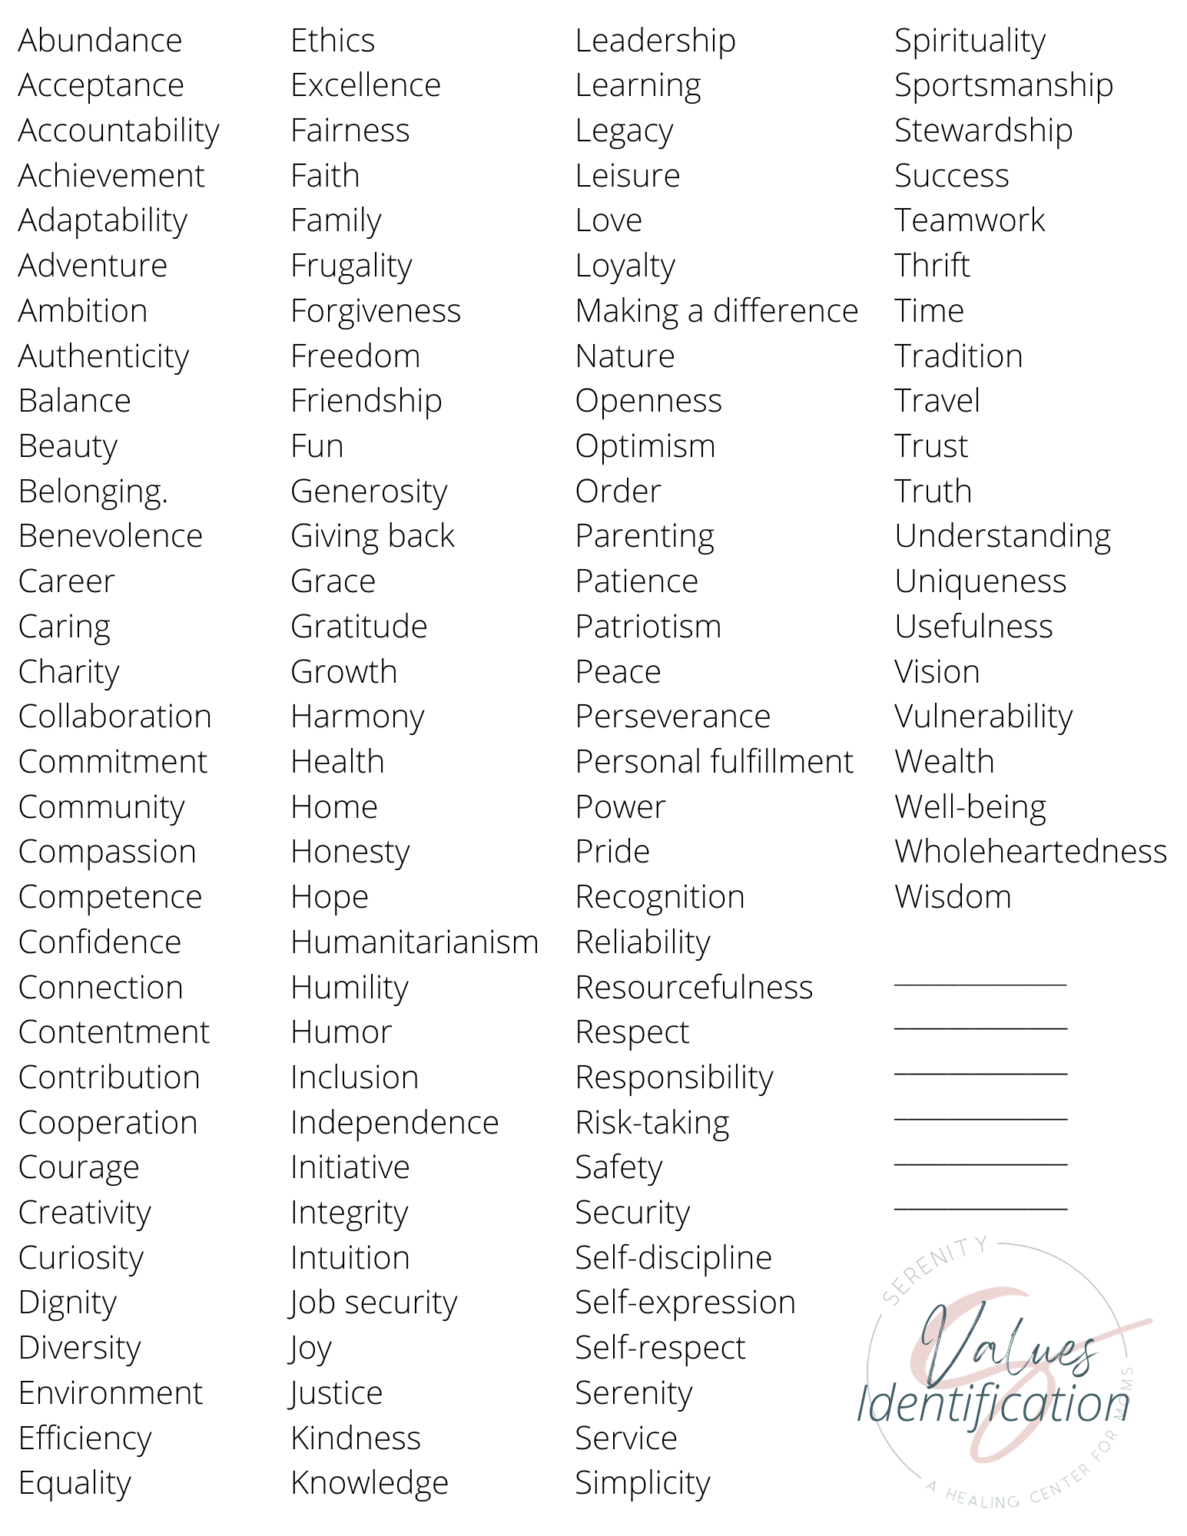 Values Identification and Clarification | Serenity Recovery & Wellness